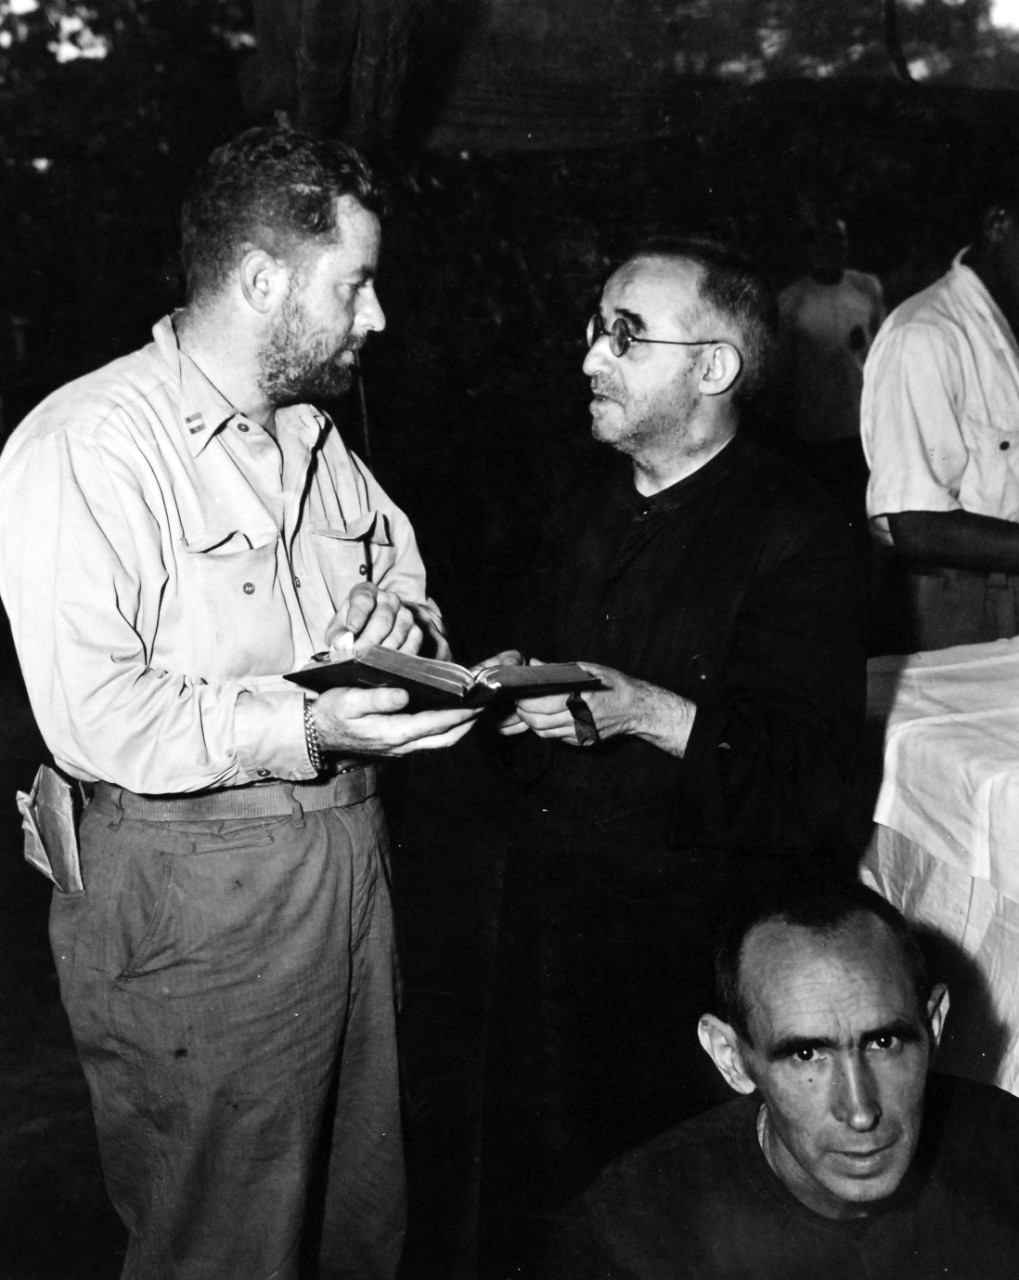 80-G-475145:  Invasion of Saipan, June-July 1944.  Catholic priest, (right), who escaped from the Japanese during Saipan during Saipan Campaign makes arrangements with the Marine Captain to say first Mass since 1940.  Photographed by Lieutenant Paul Dorsey, July 1944, TR-10225.      Official U.S. Navy photograph, now in the collections of the National Archives.   (2017/03/15).